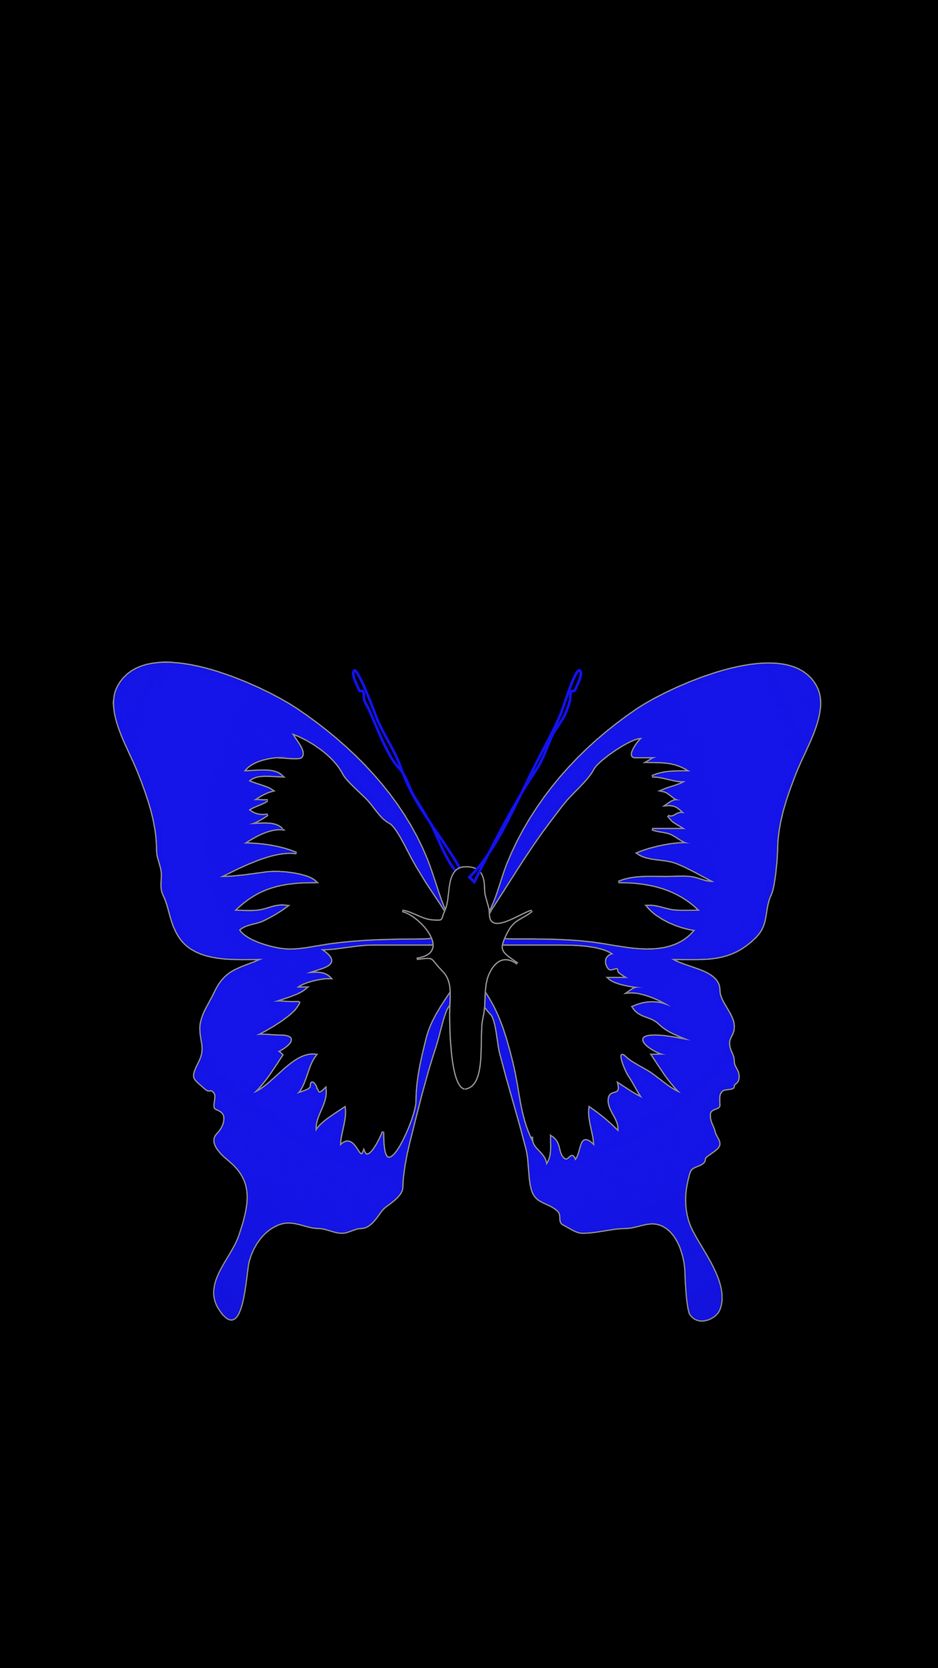 Download Wallpaper 938x1668 Butterfly Minimalism Black Blue Iphone 8 7 6s 6 For Parallax Hd Background